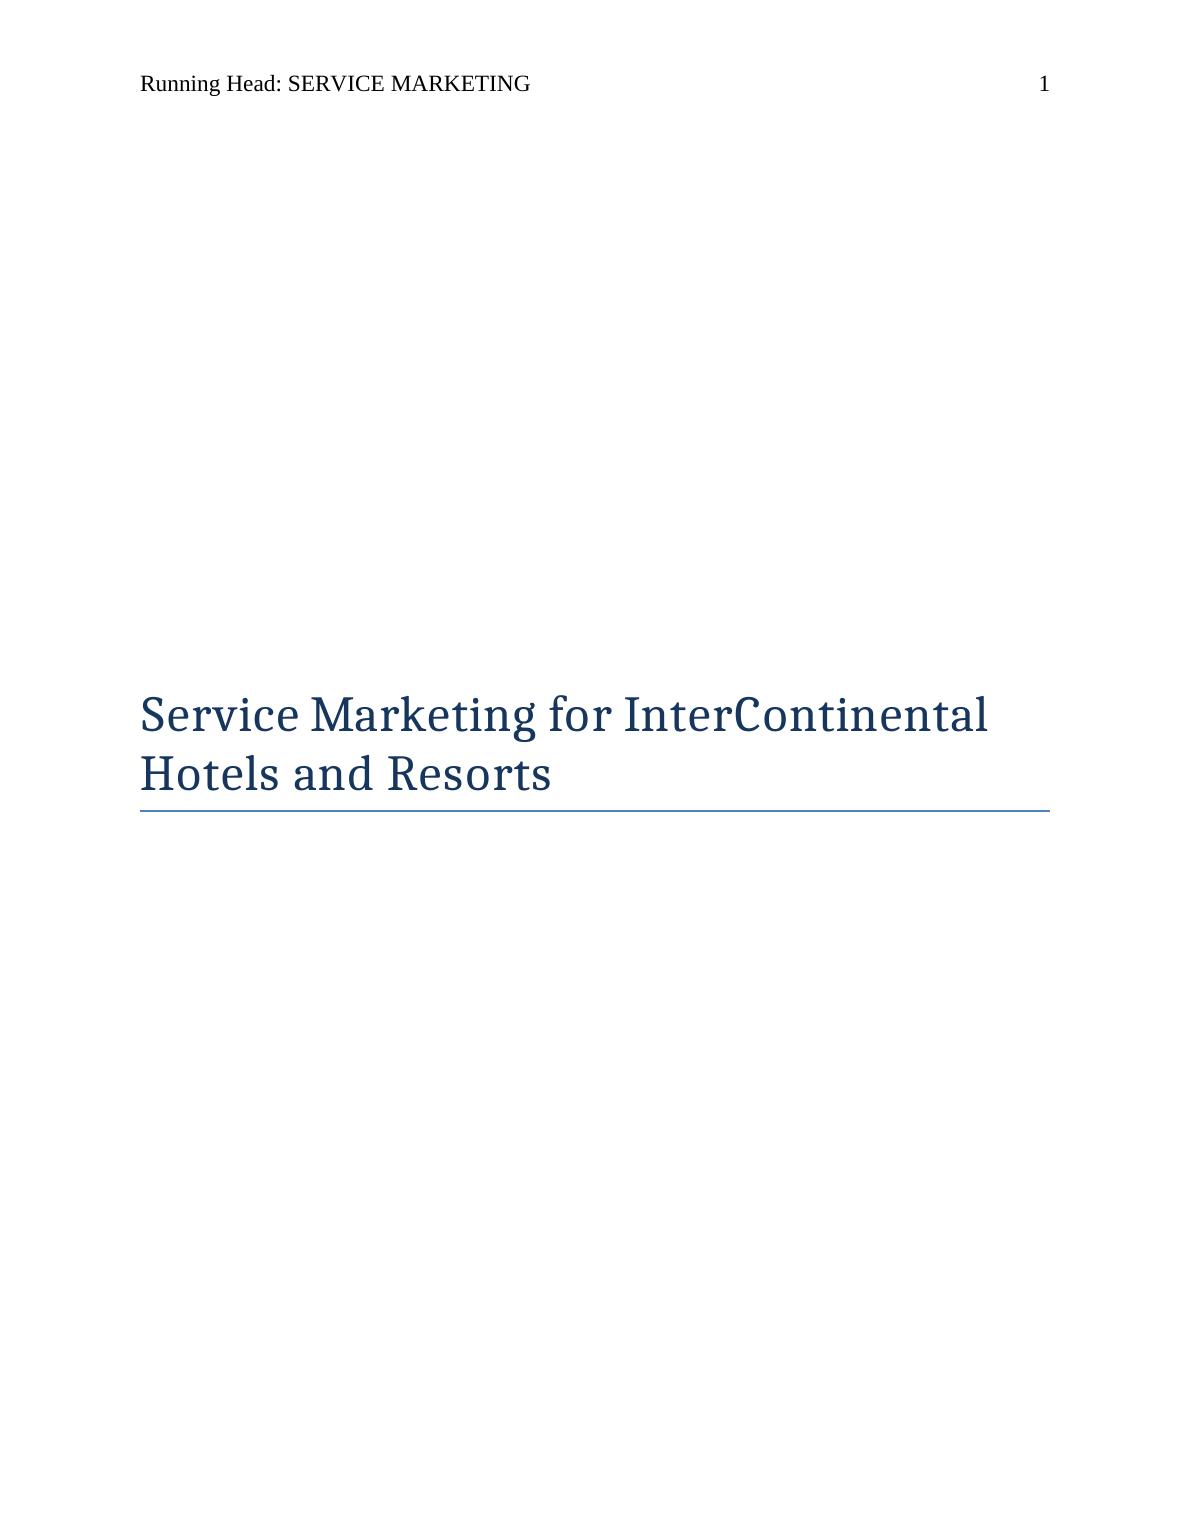 Assignment on Service Marketing for InterContinental Hotels and Resorts_1